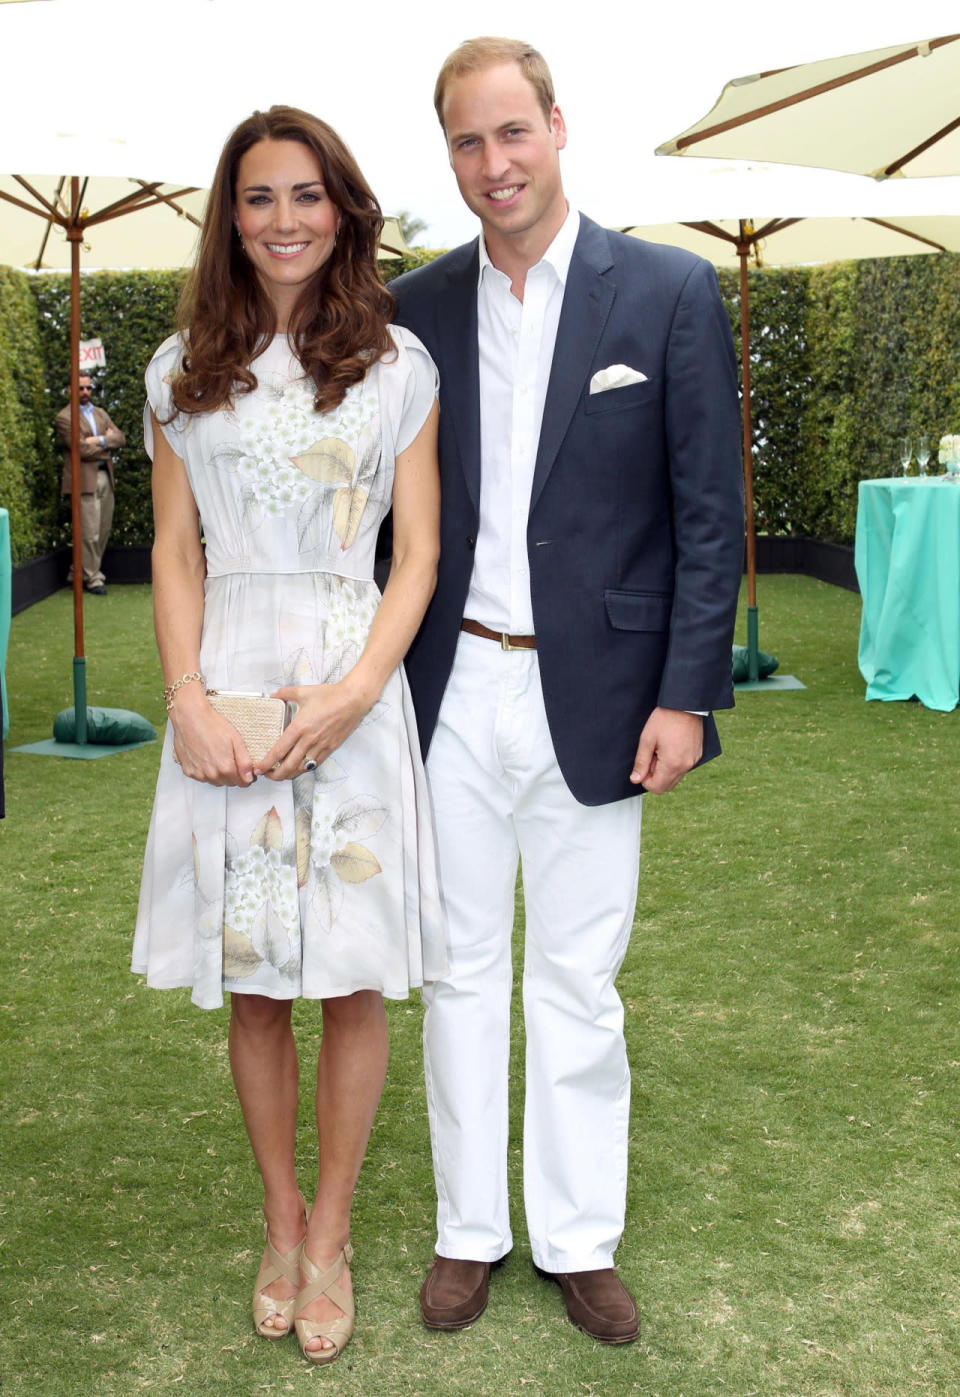 <p>The Duchess wore a handpainted silk dress by Jenny Packham for a polo match in Santa Barbara. L.K. Bennett sandals and a matching bag topped off her outfit. </p><p><i>[Photo: PA]</i></p>